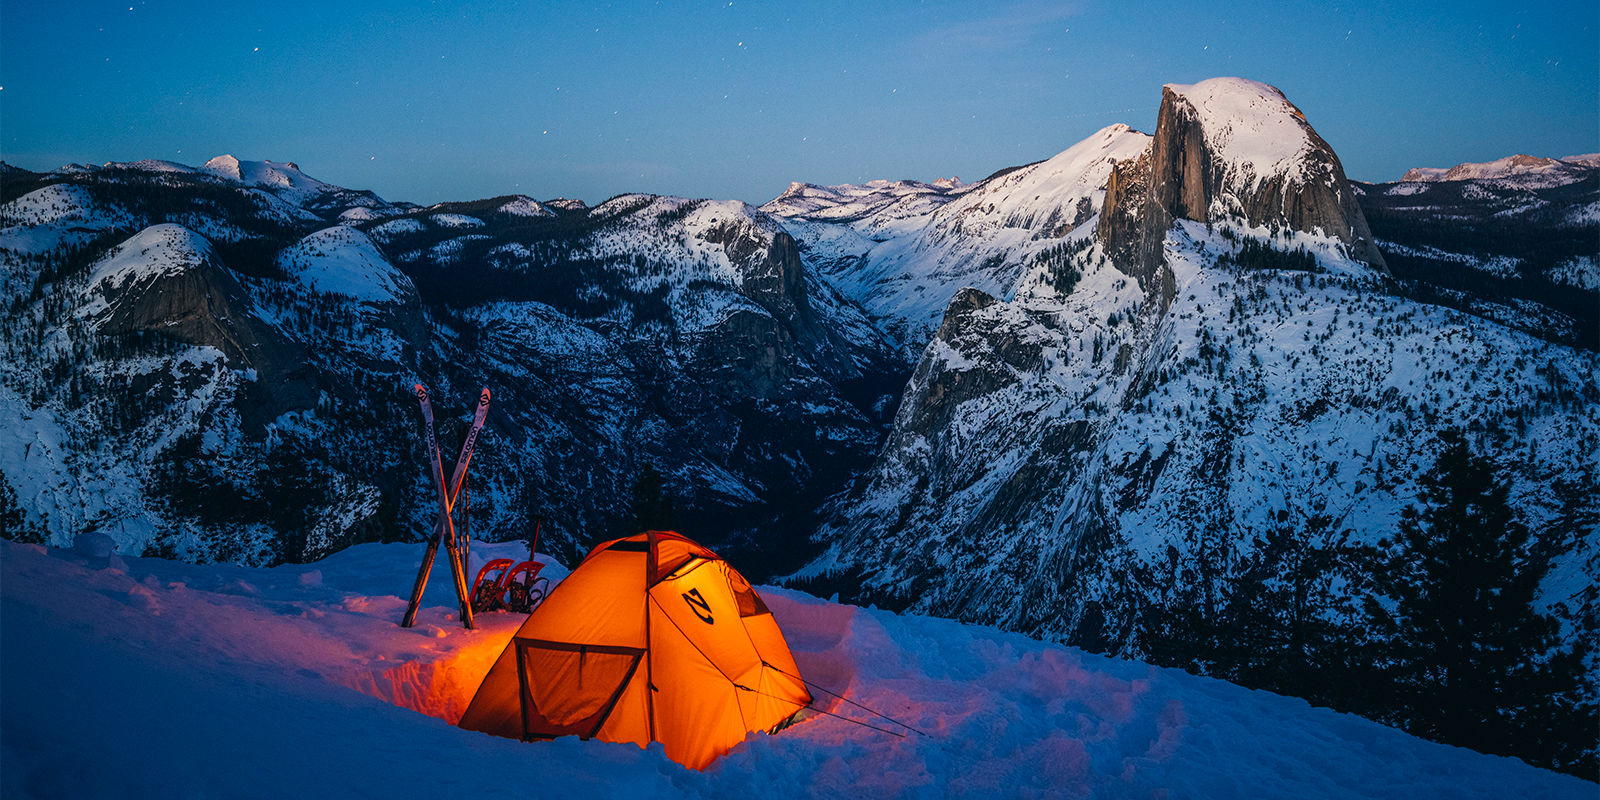 How to Go Winter Camping